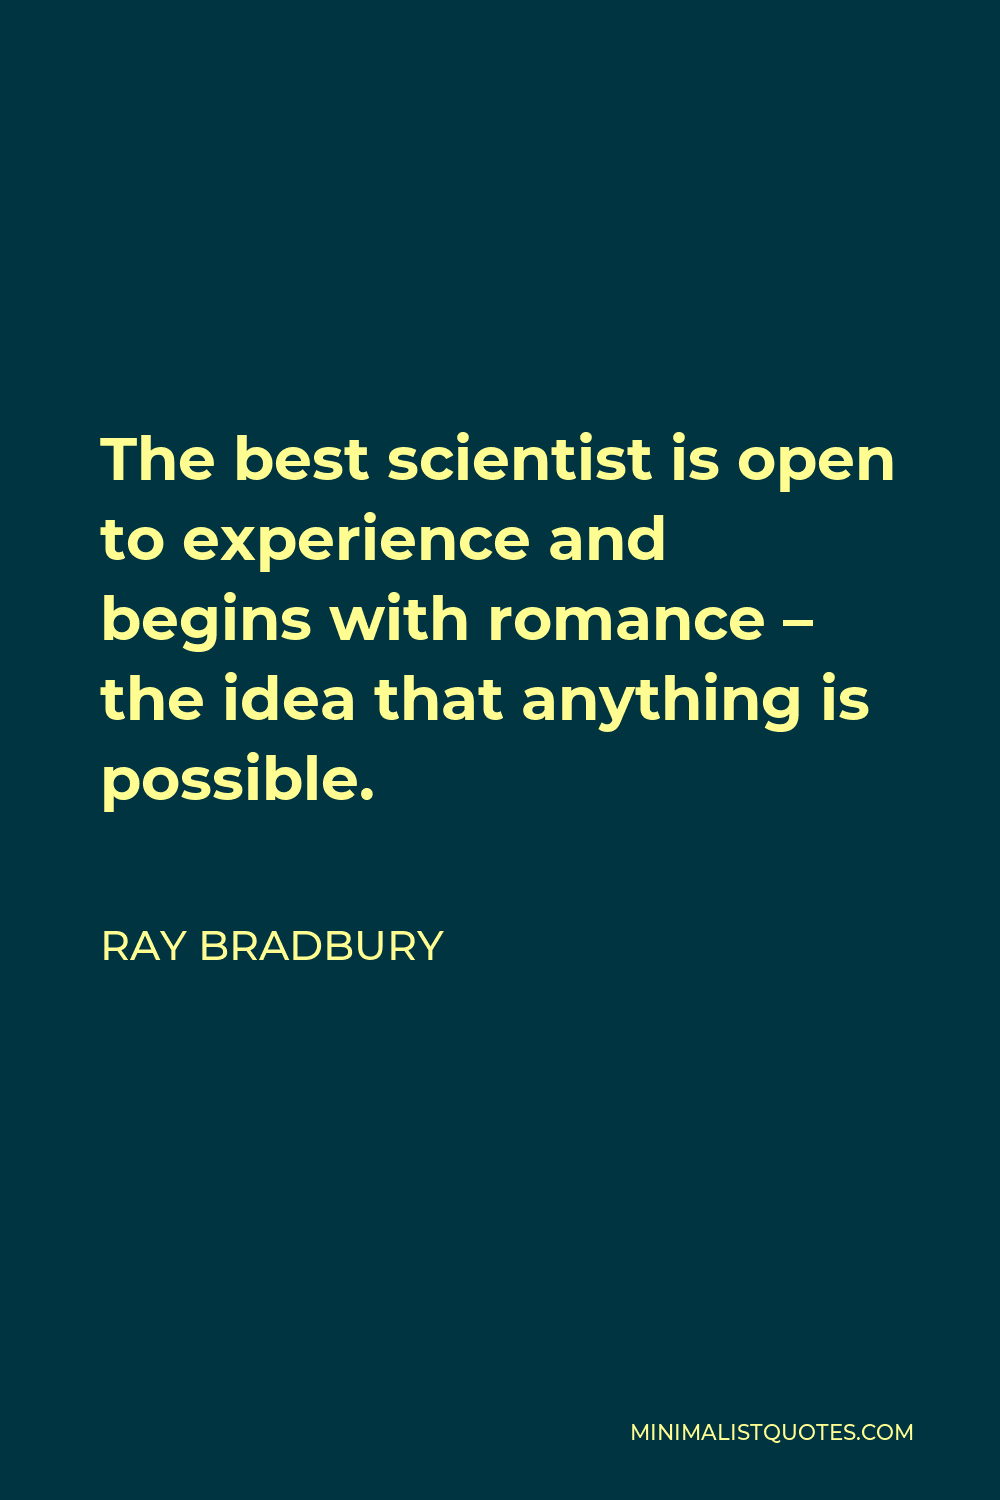 Ray Bradbury Quote - The best scientist is open to experience and begins with romance – the idea that anything is possible.